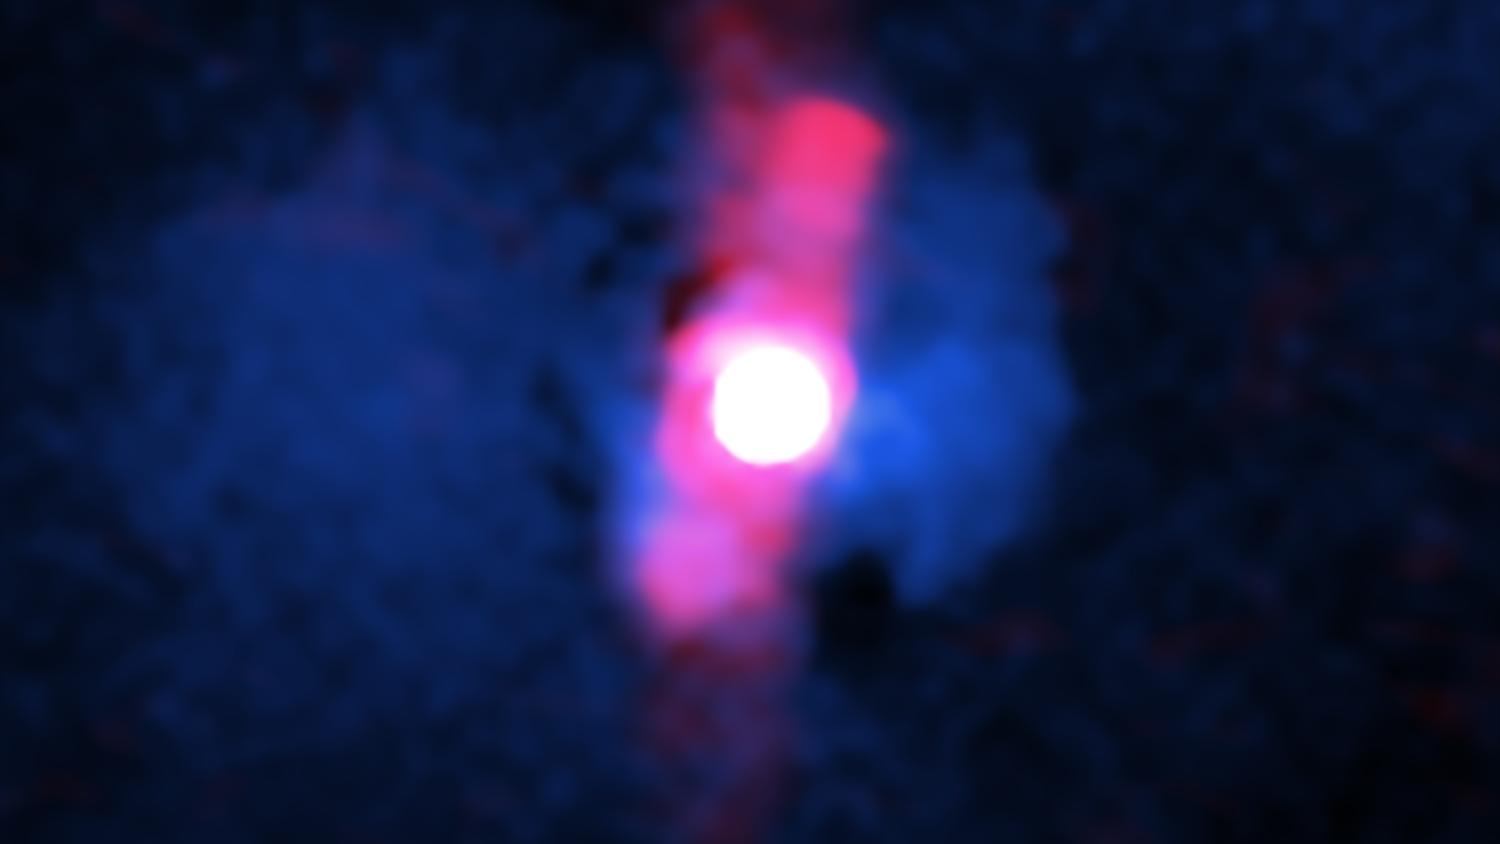 Radio data and X-rays from the quasar H1821+643